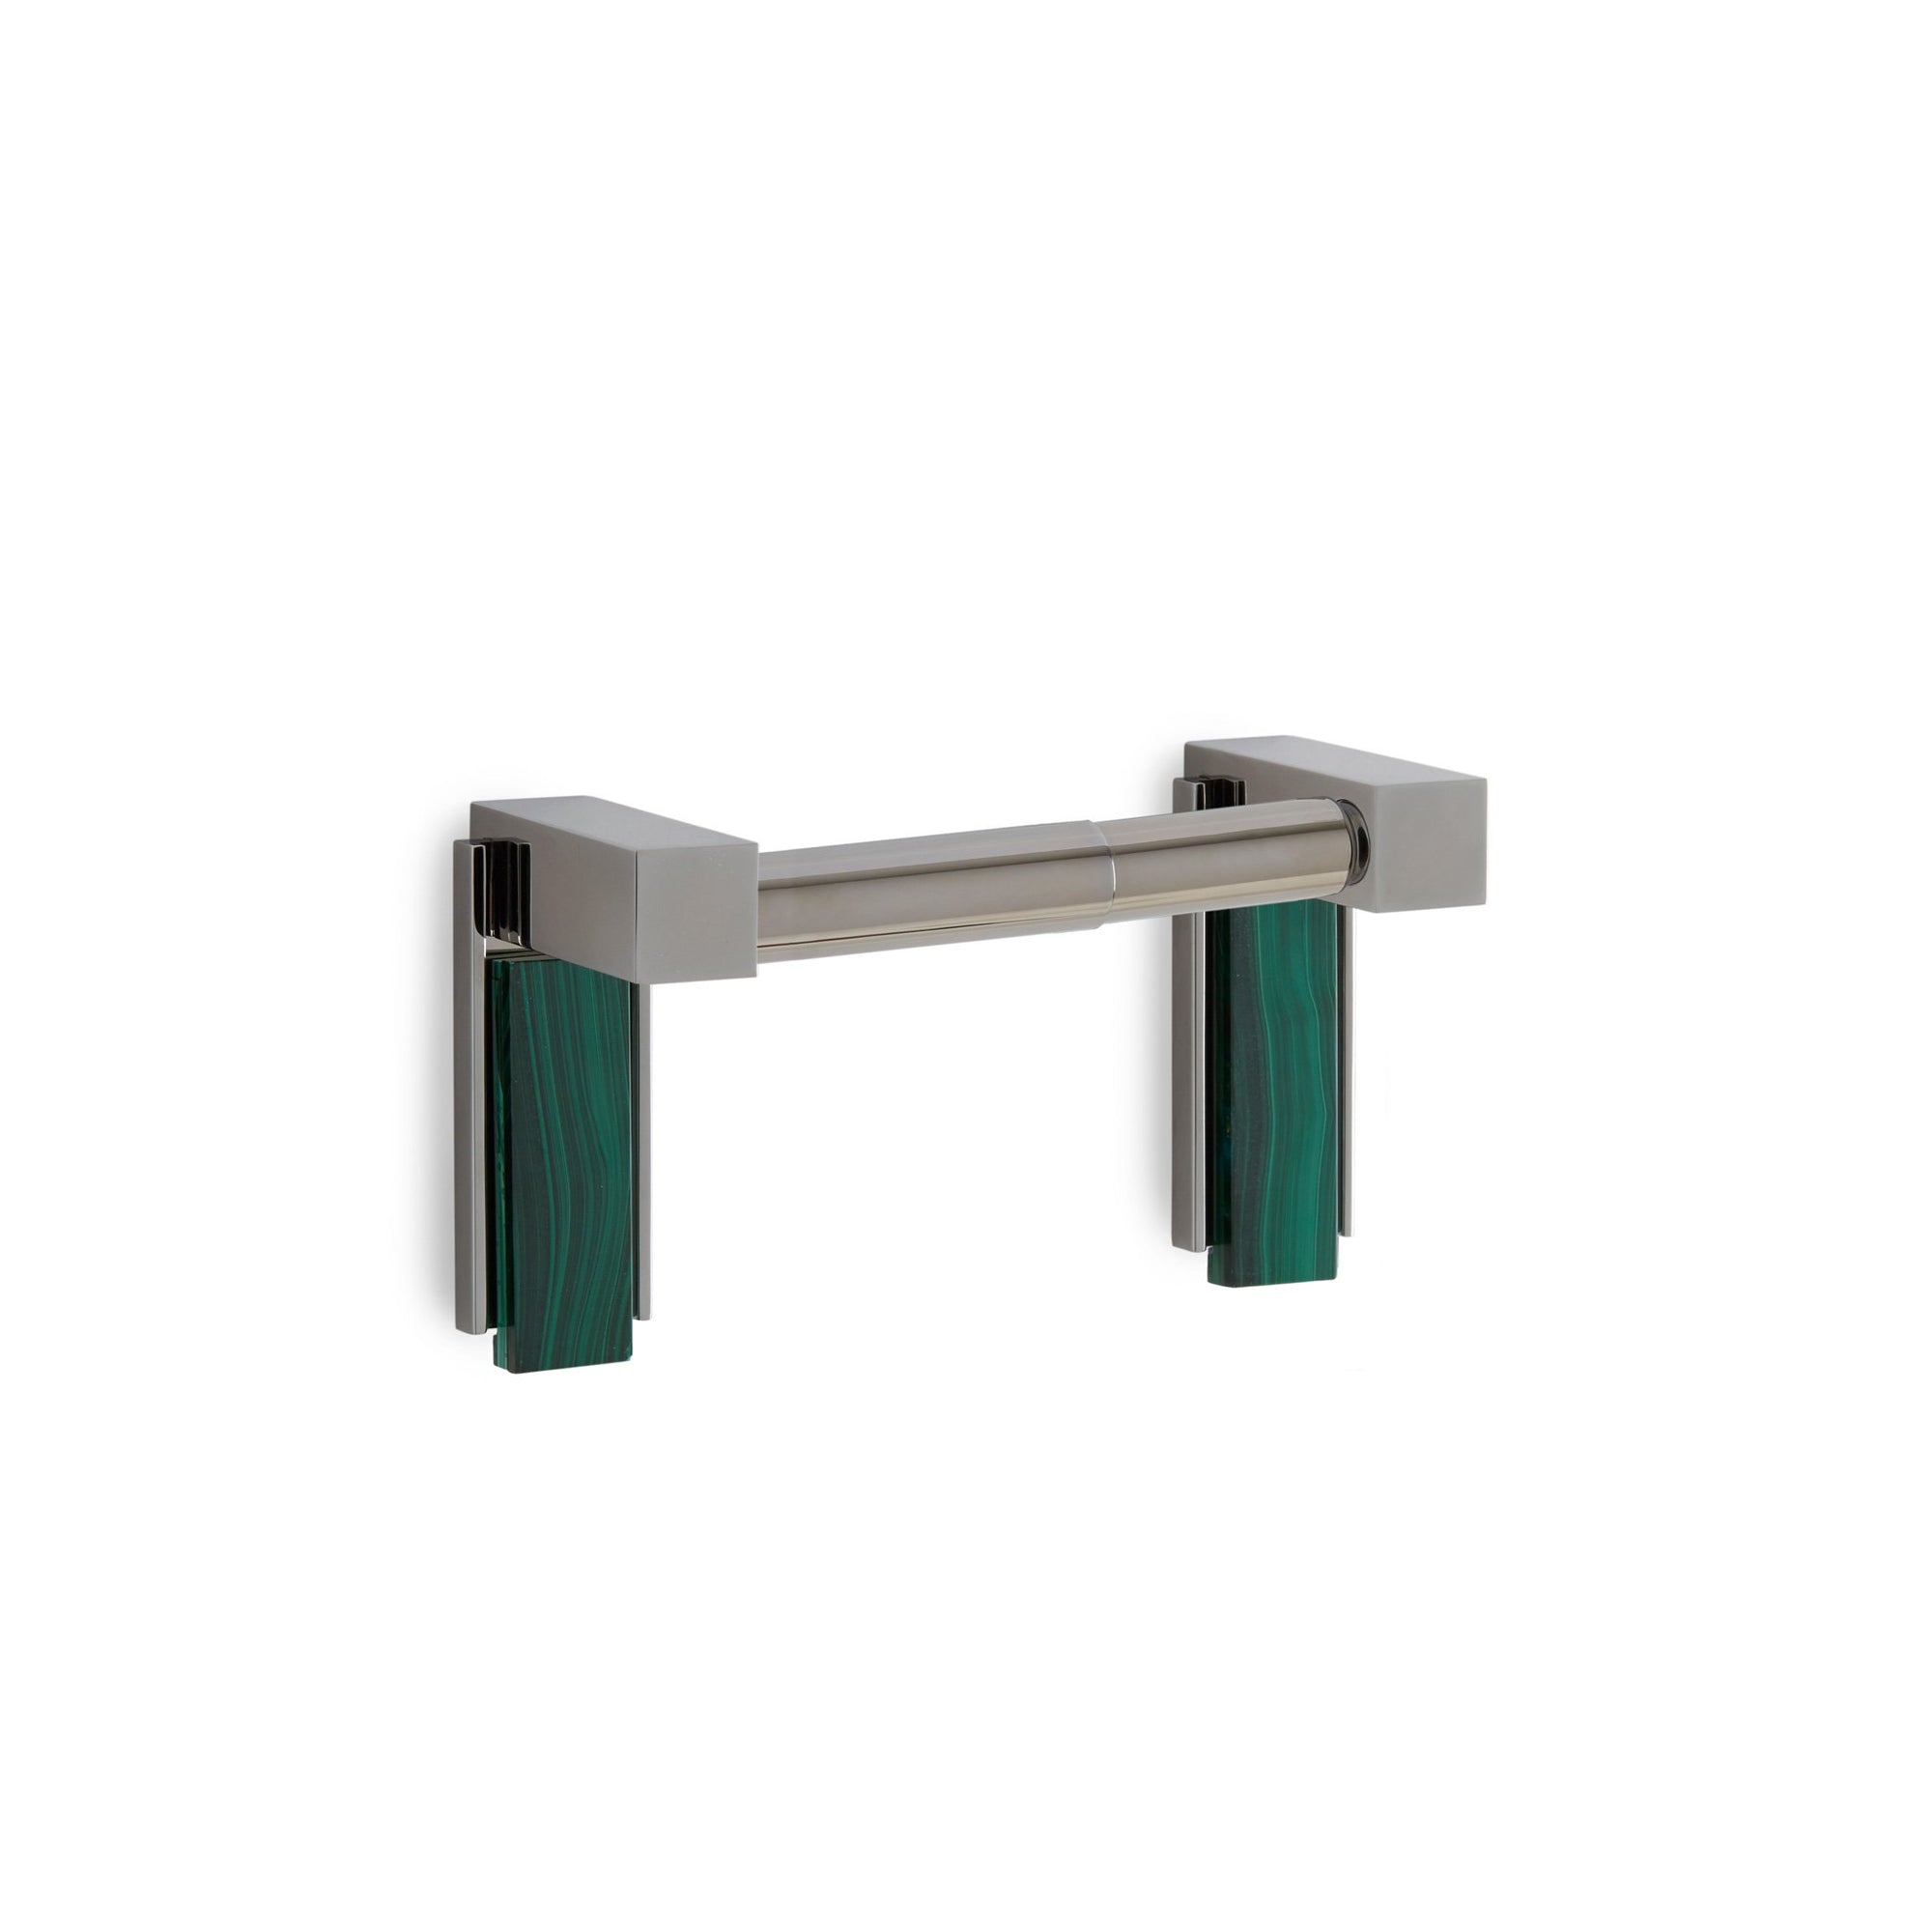 3457-DP-MALA-CP Sherle Wagner International Apollo Double Post Paper Holder with Malachite insert in Polished Chrome metal finish